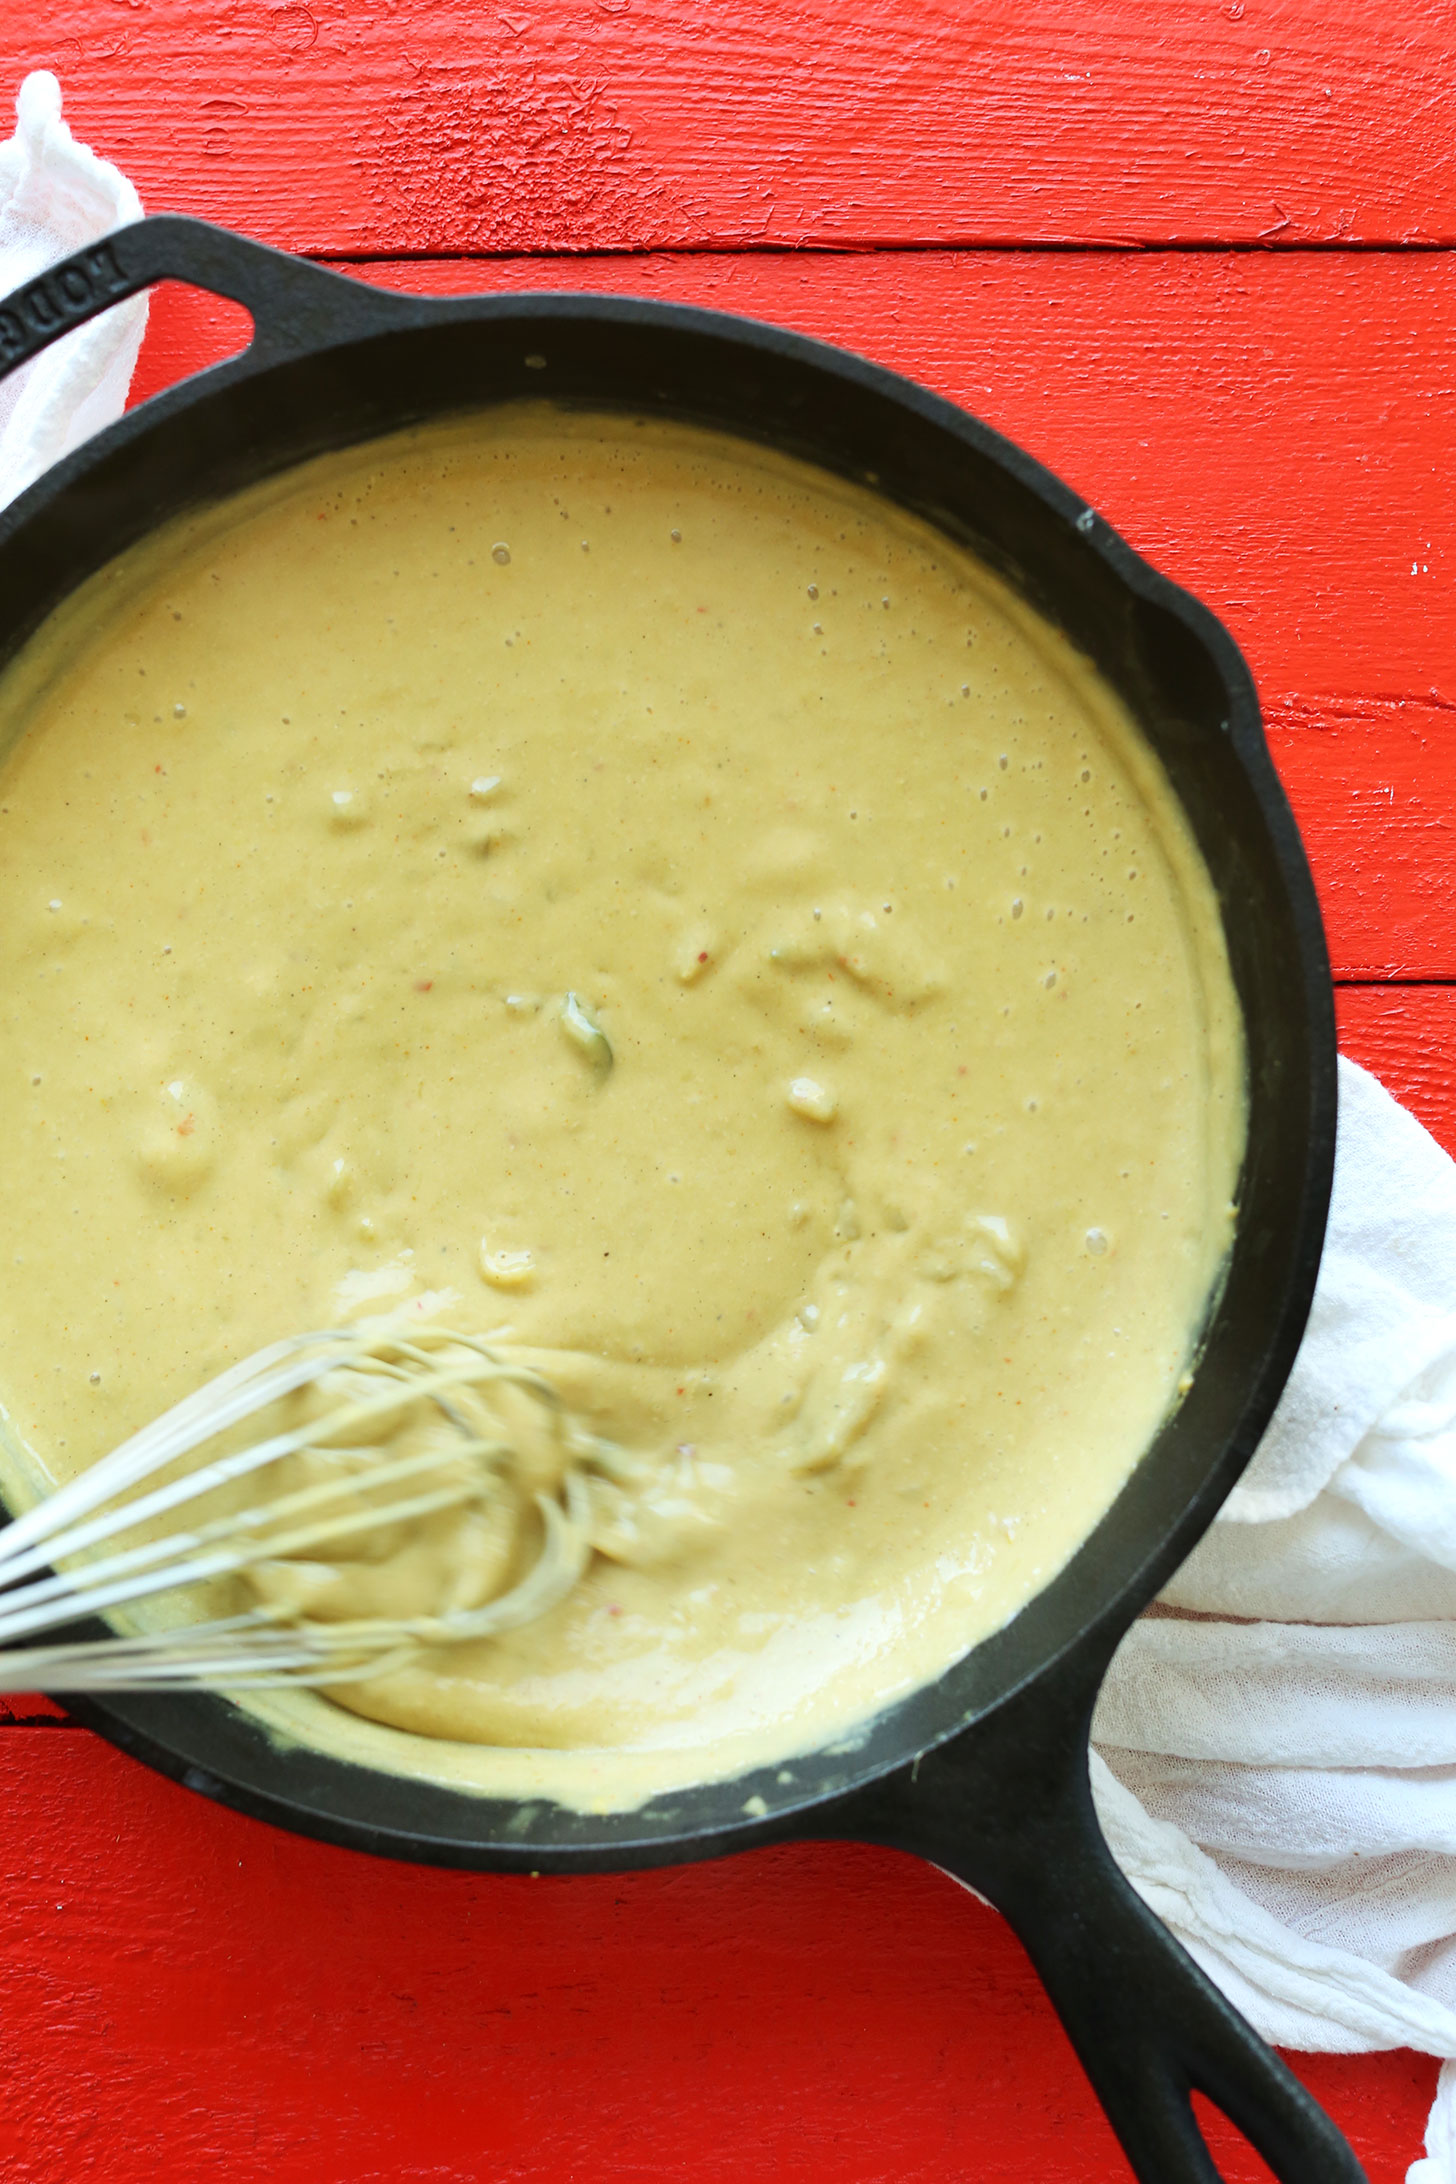 Whisking Vegan Green Chili Queso in a cast-iron skillet for a delicious vegan dip recipe